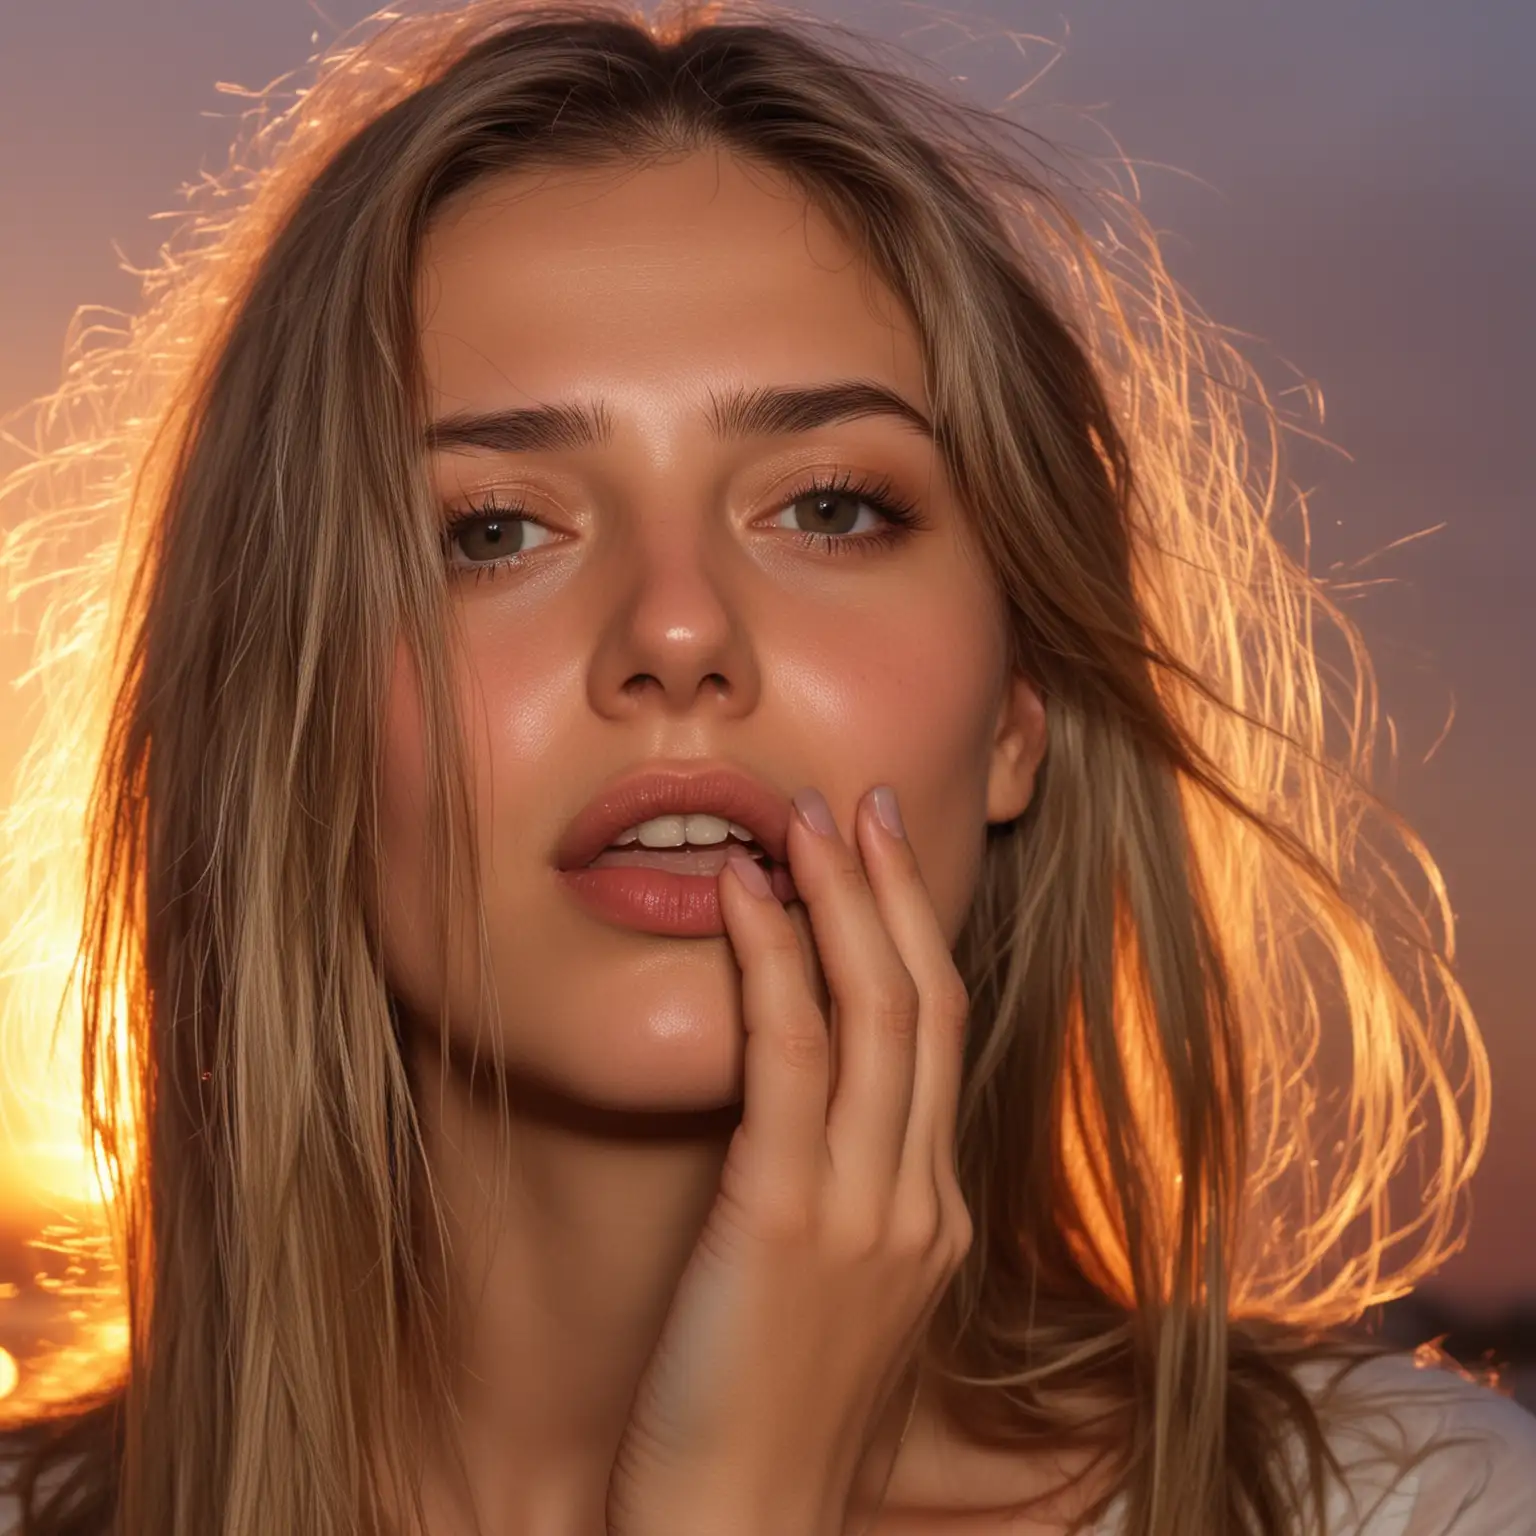 Sensual-Young-Woman-with-Flowing-Hair-in-Sunset-Gaze